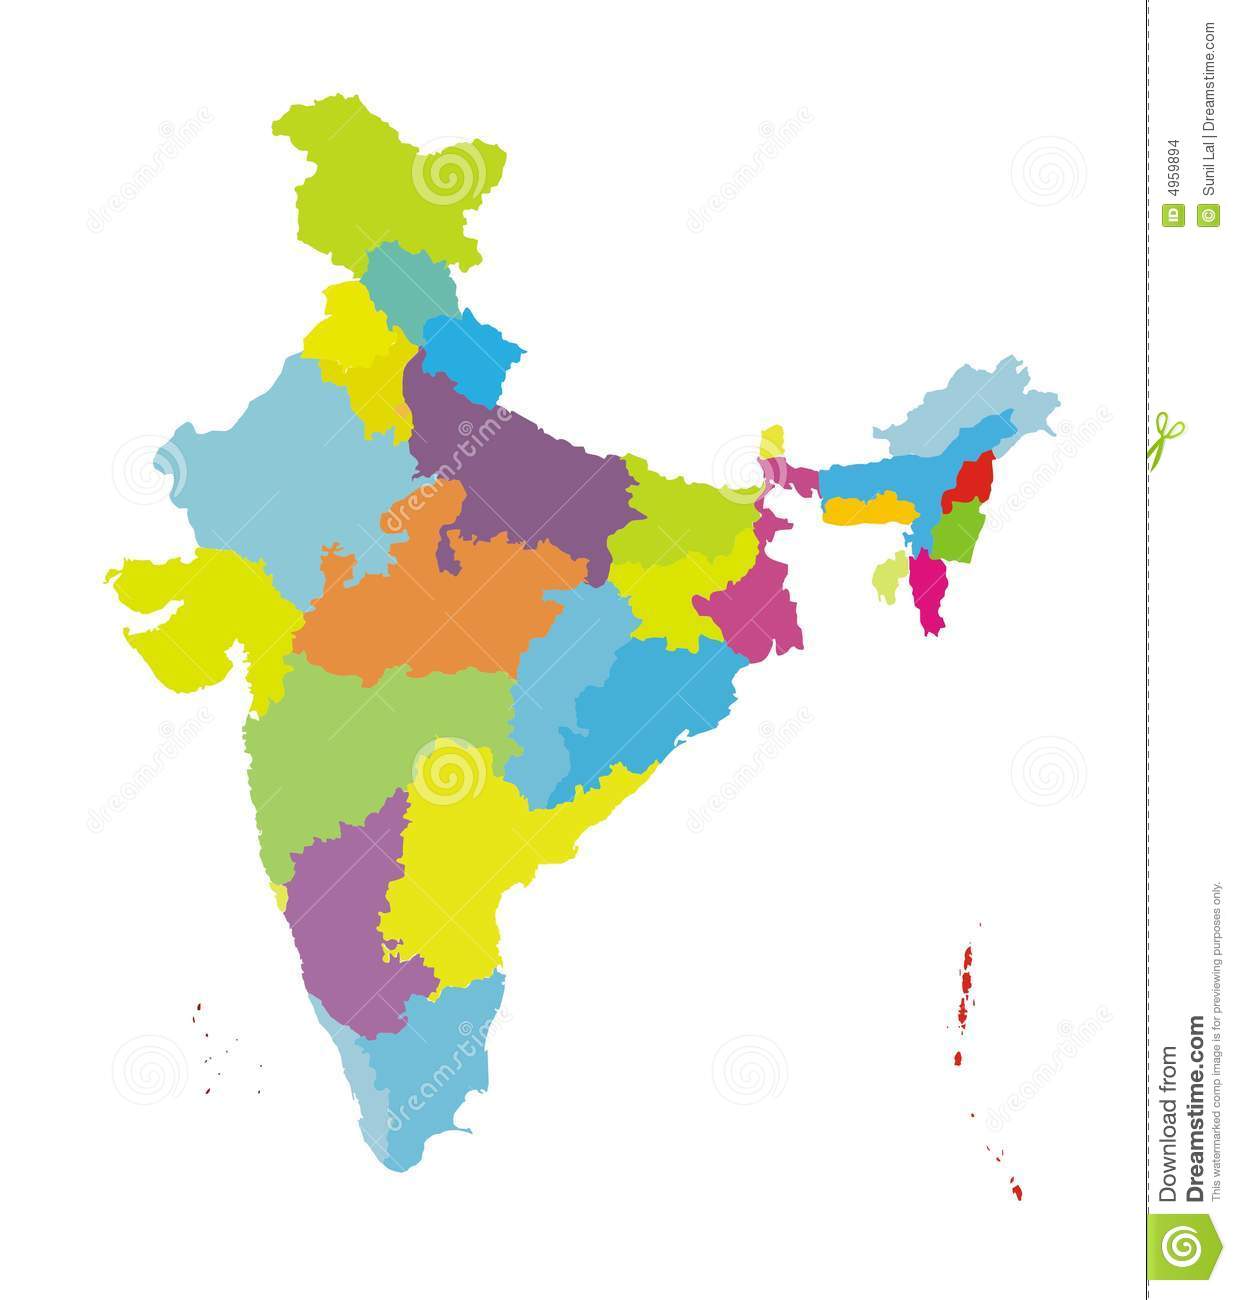 Map Of India  Authentic Stock Images   Image  4959894